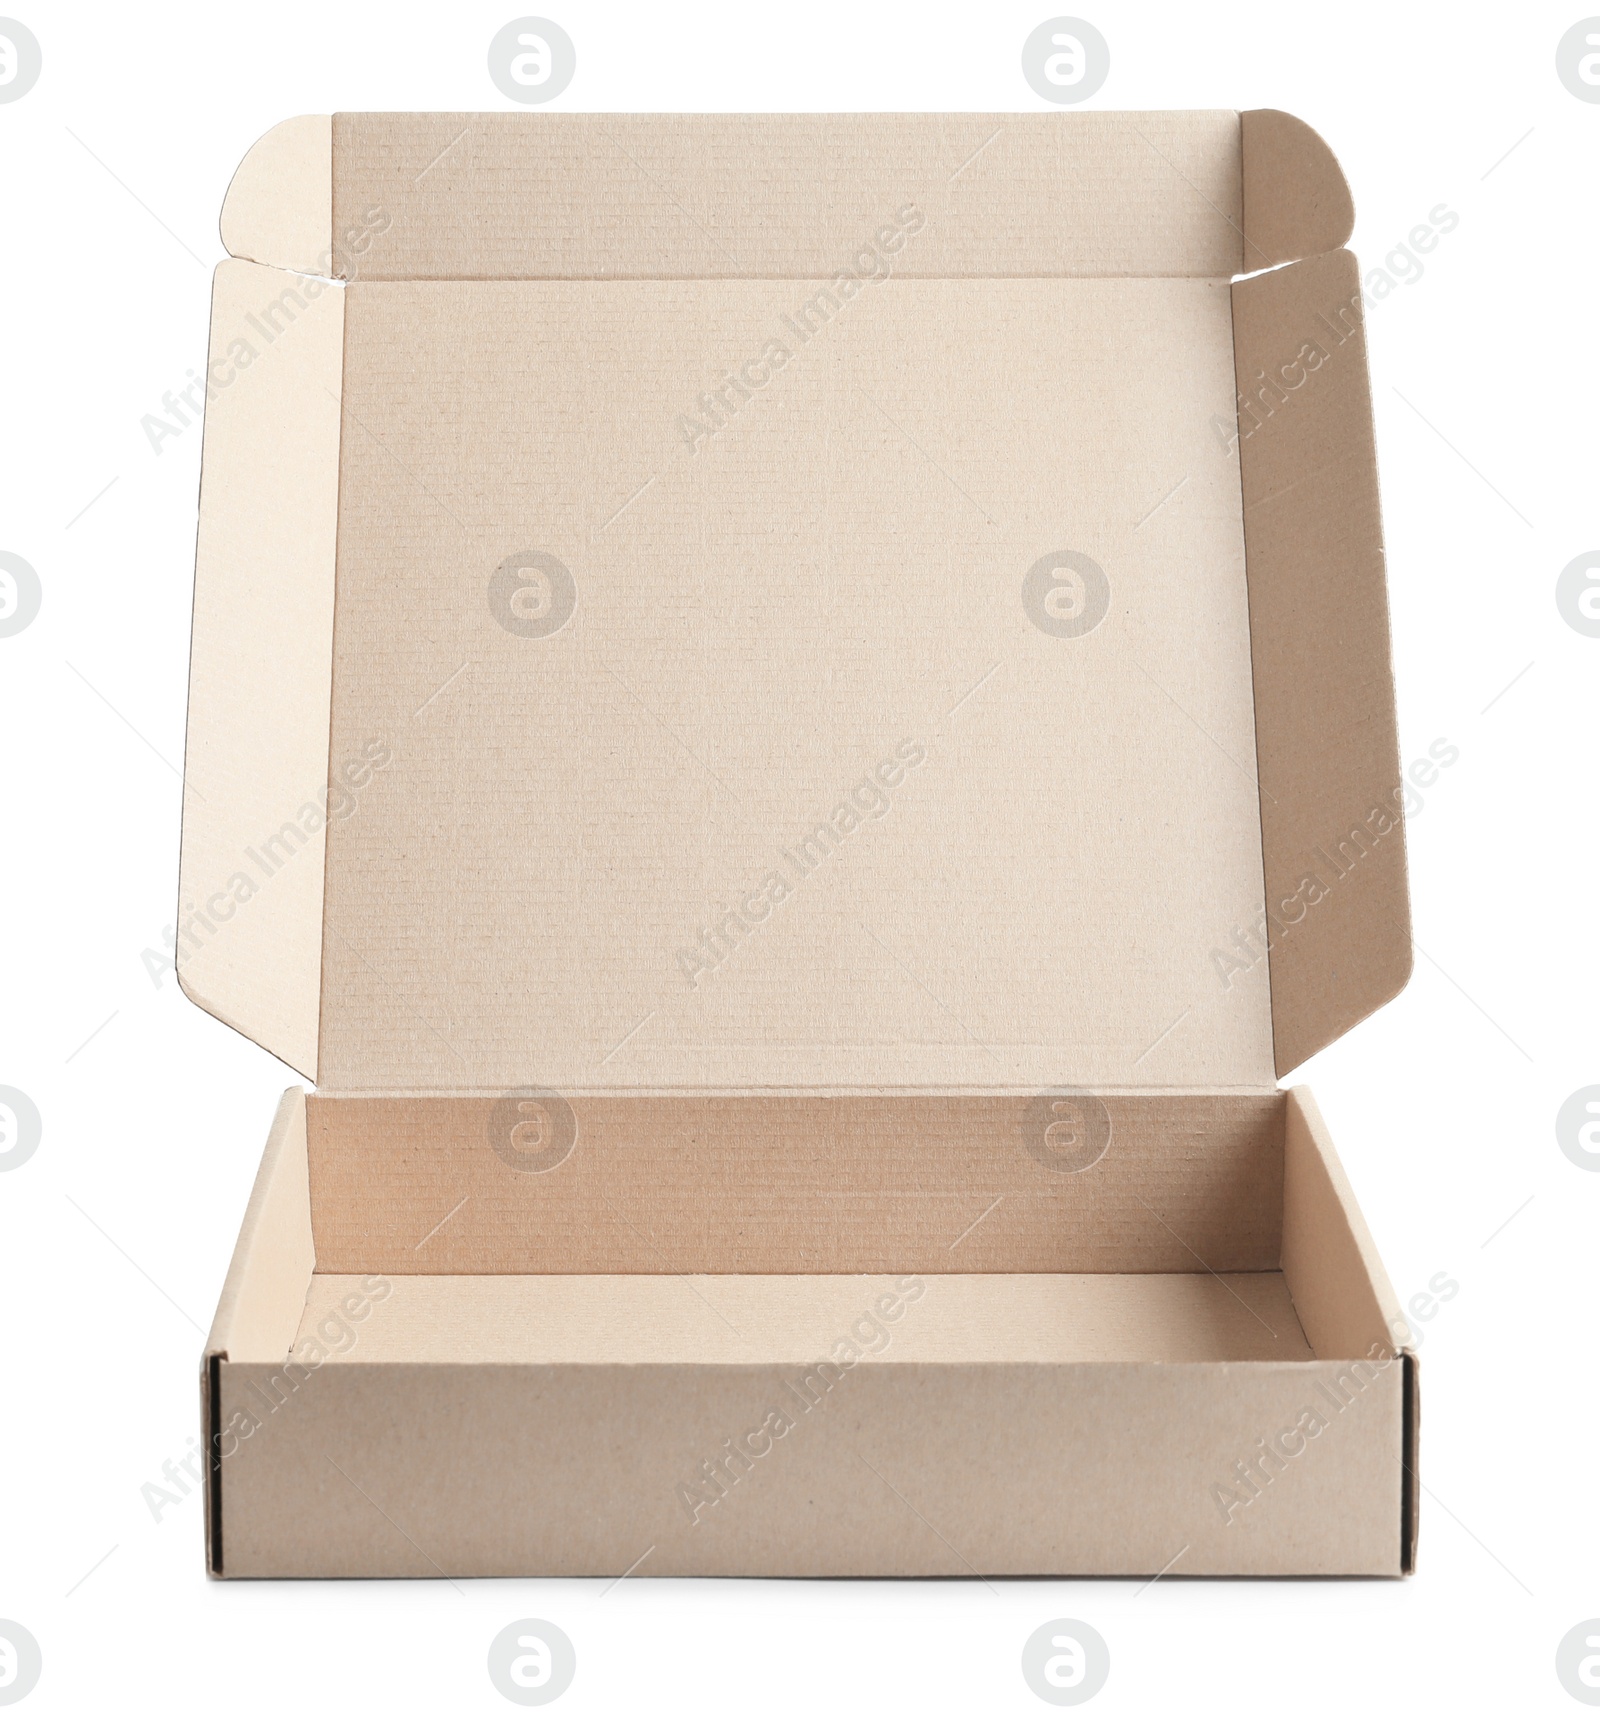 Photo of Open cardboard pizza box on white background